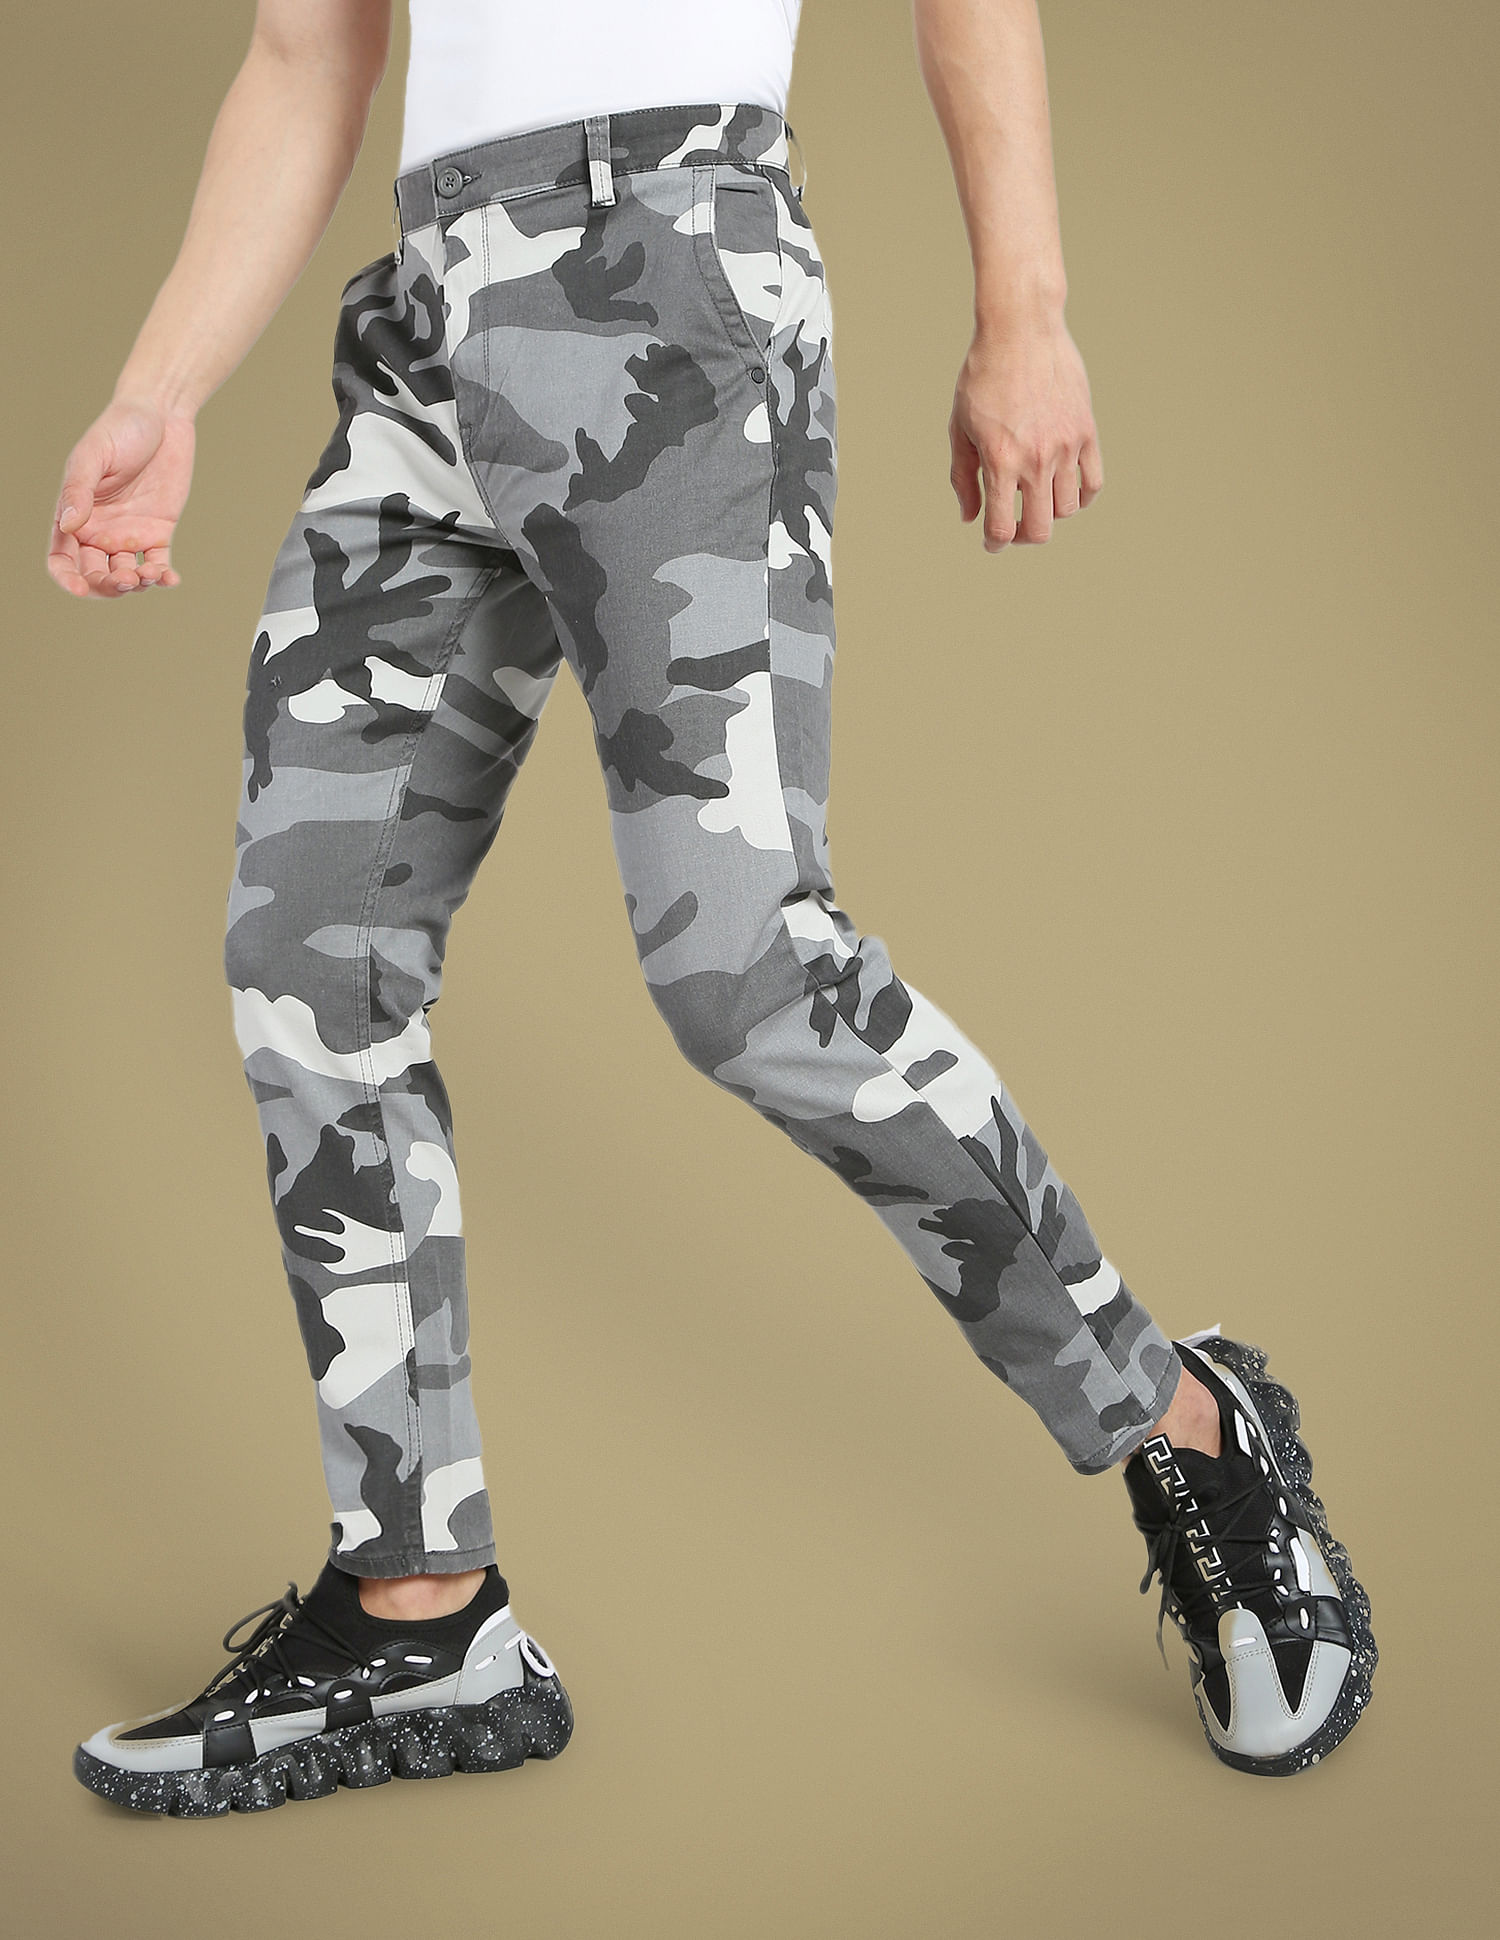 Buy Add-venture India Cotton Military Camo Cargo Pant, 38-inch (Woodland  Camouflage) at Amazon.in